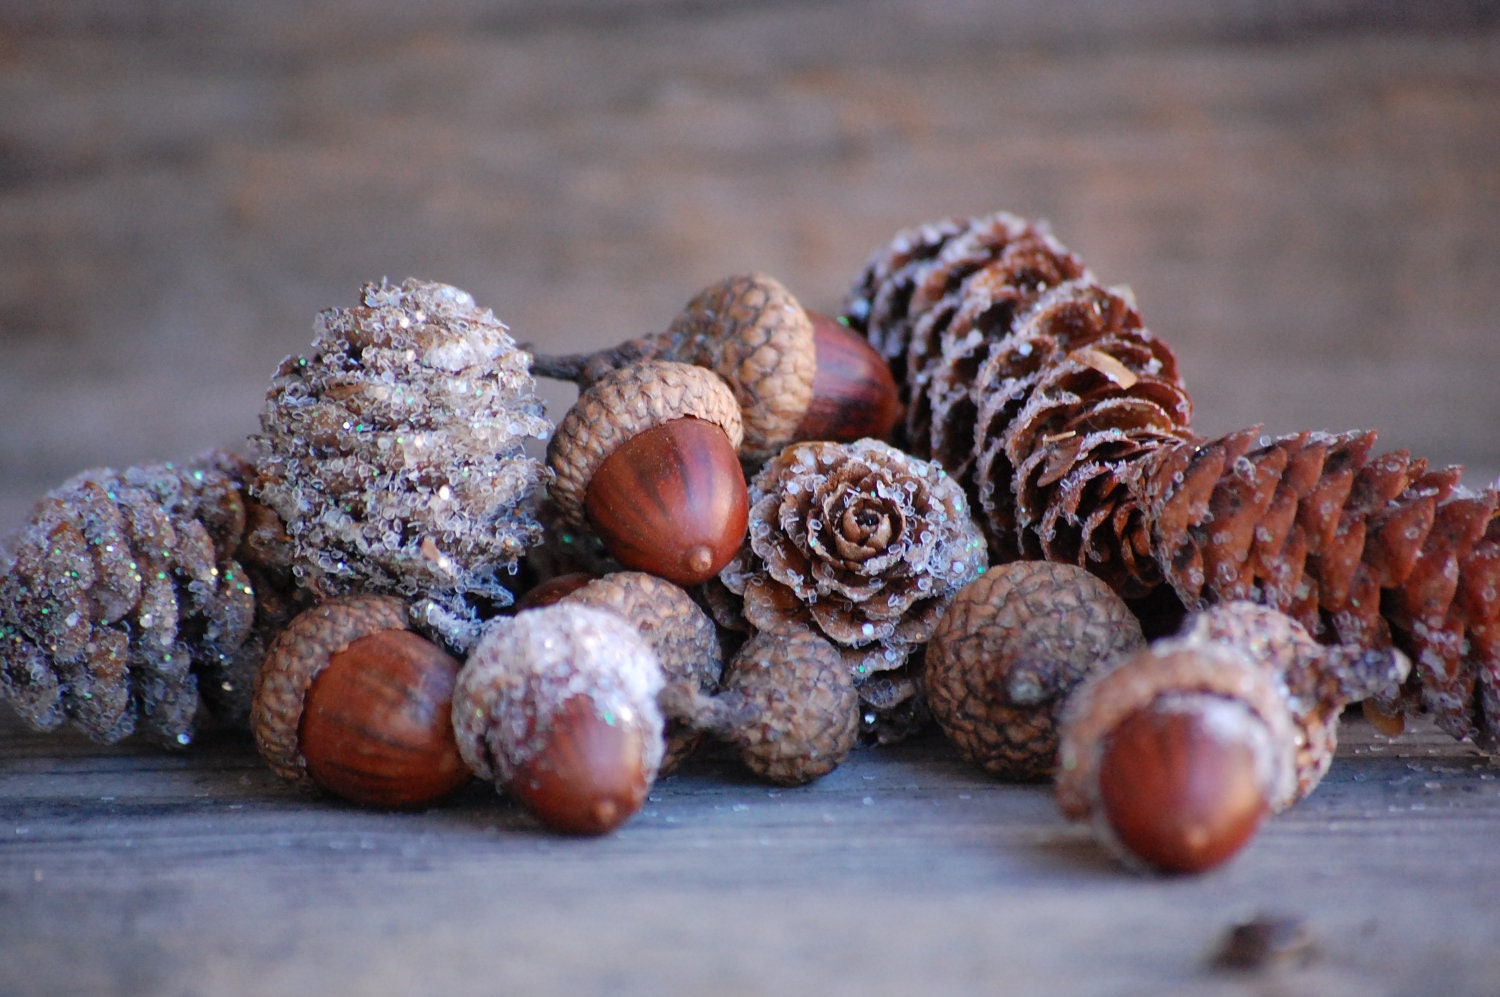 Real Pine cones, Real Acorns, Birch Bark, with glitter Christmas table,Pinecones, Dried Acorns, Winter wedding Christmas Basket Decoration - CreationsByShelly